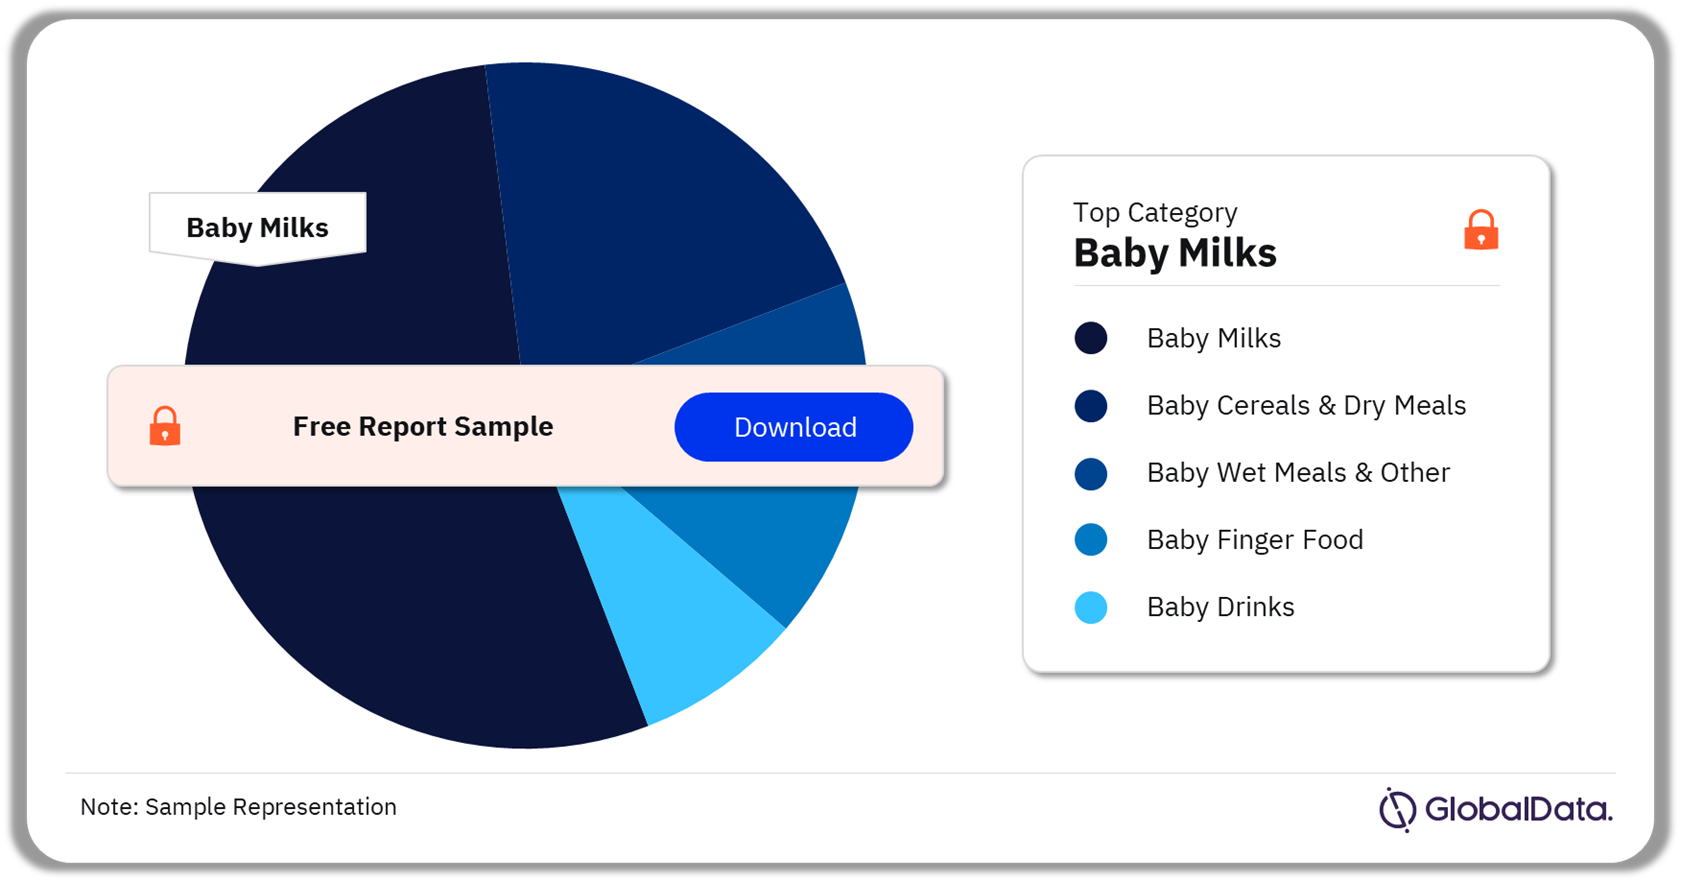 Baby milk category held the largest Swiss baby food market share in 2021